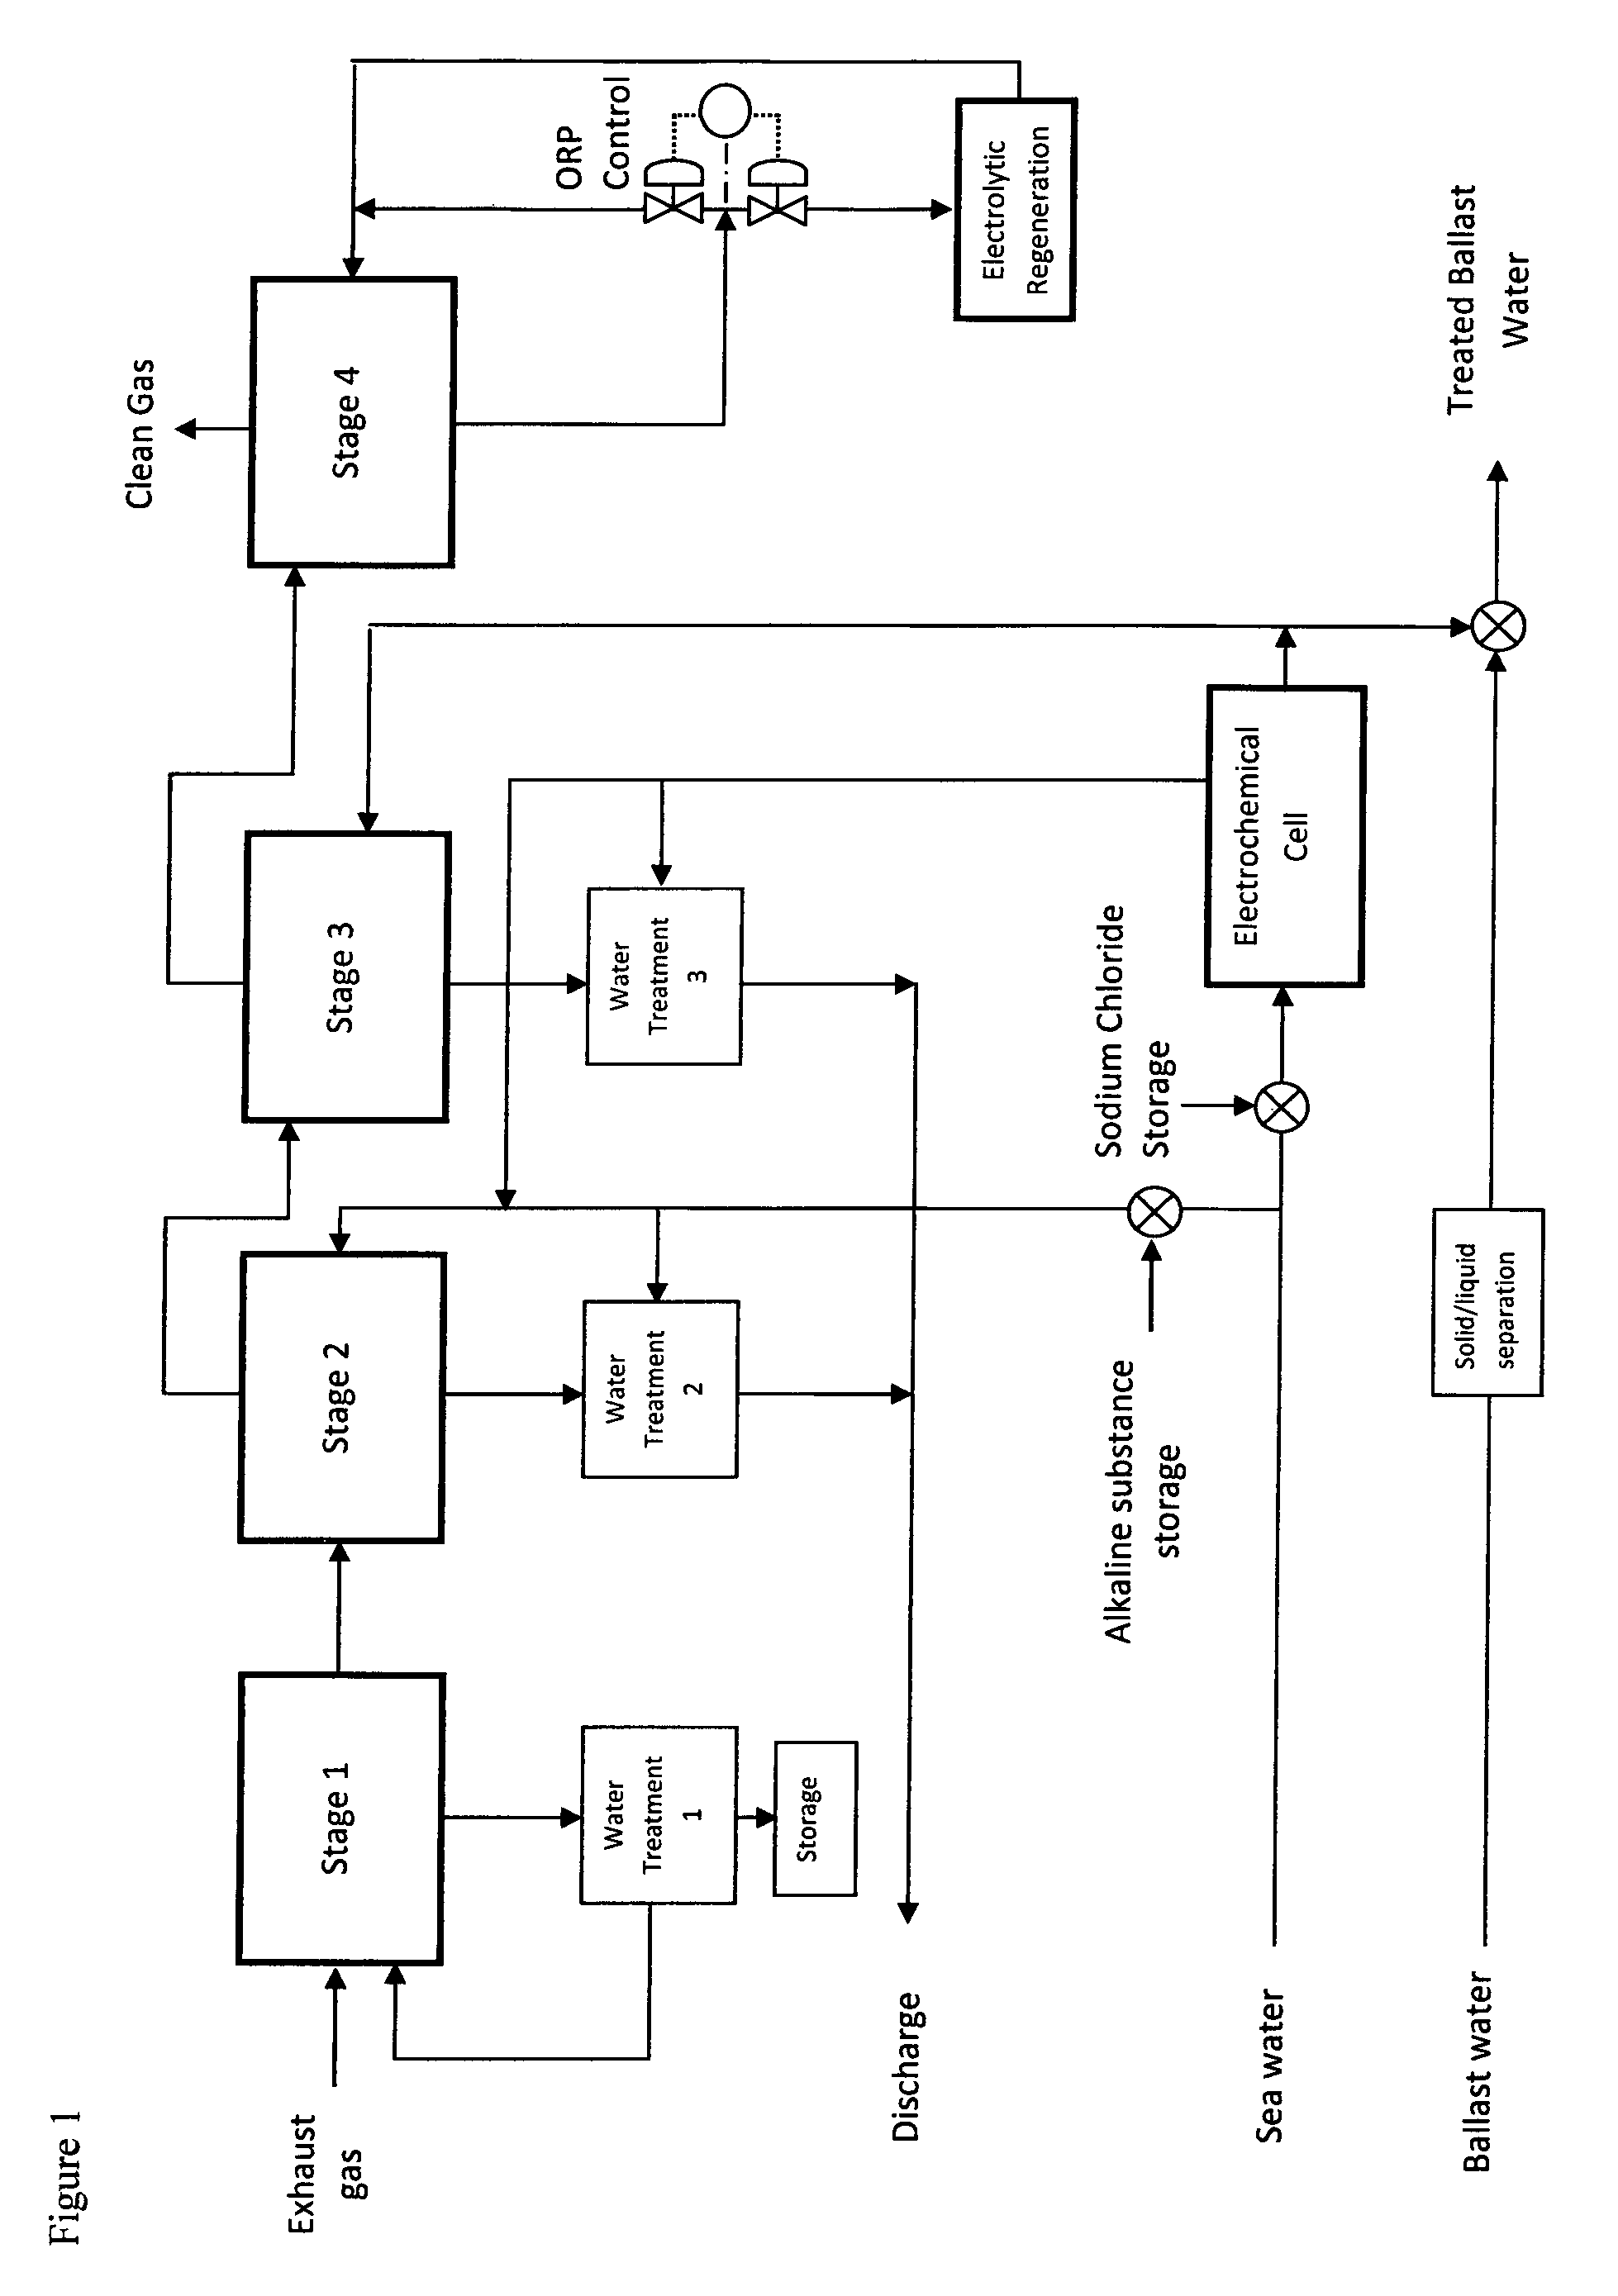 Systems and methods for exhaust gas cleaning and/or ballast water treatment